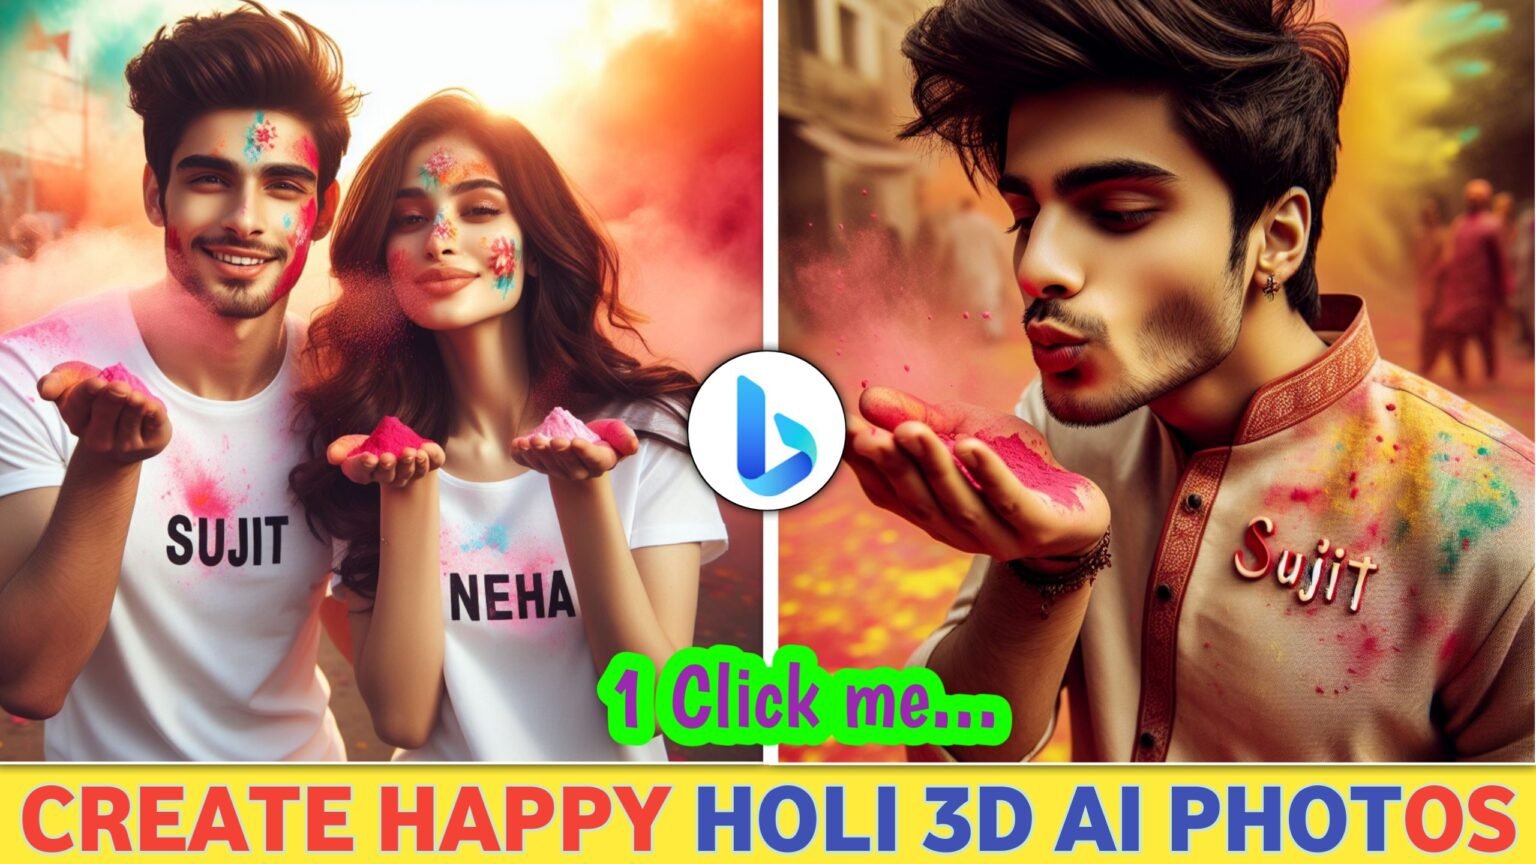 Crafting Professional-Grade Happy Holi 3D Photos with Bing Image Creator